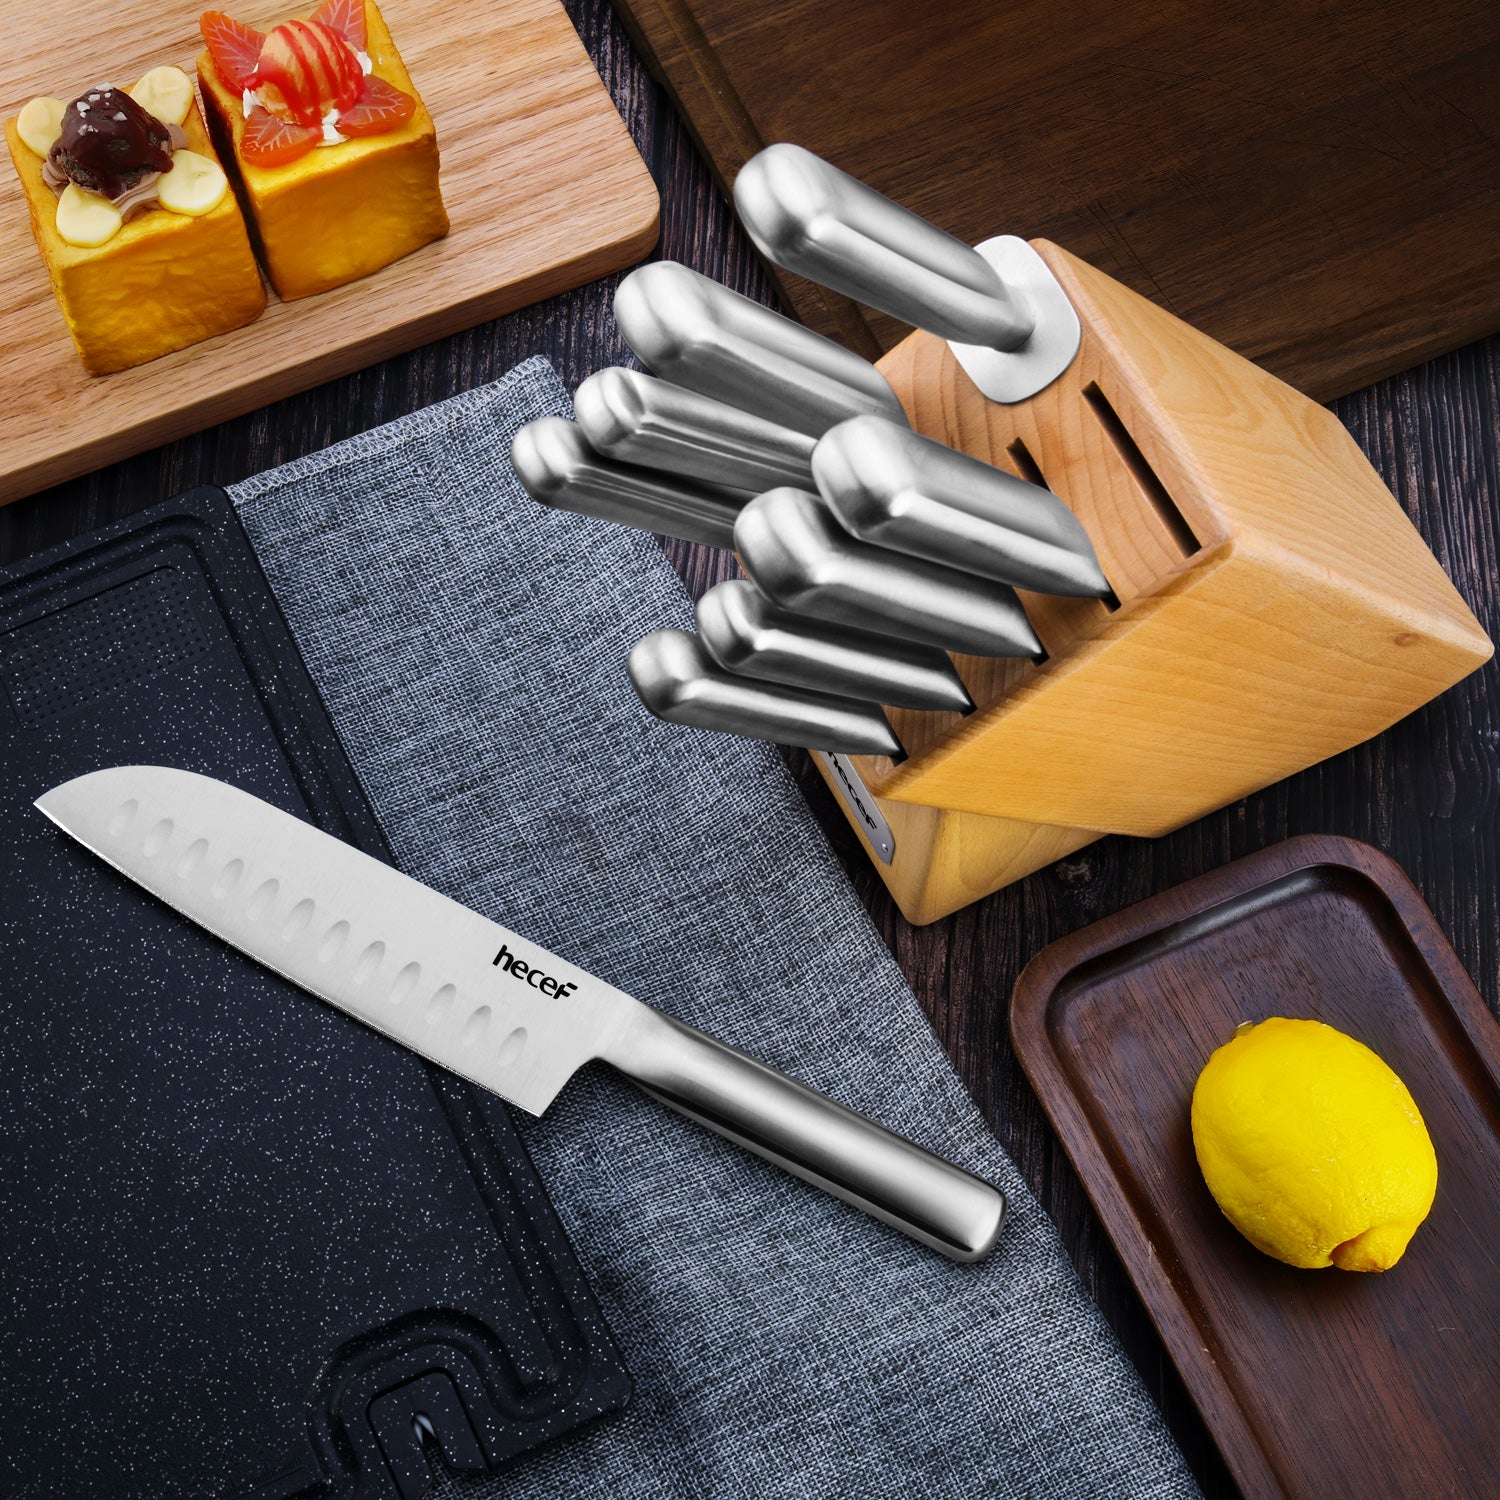 Hecef 6 Pieces Kitchen Knife Block Set, Satin Finished Stainless